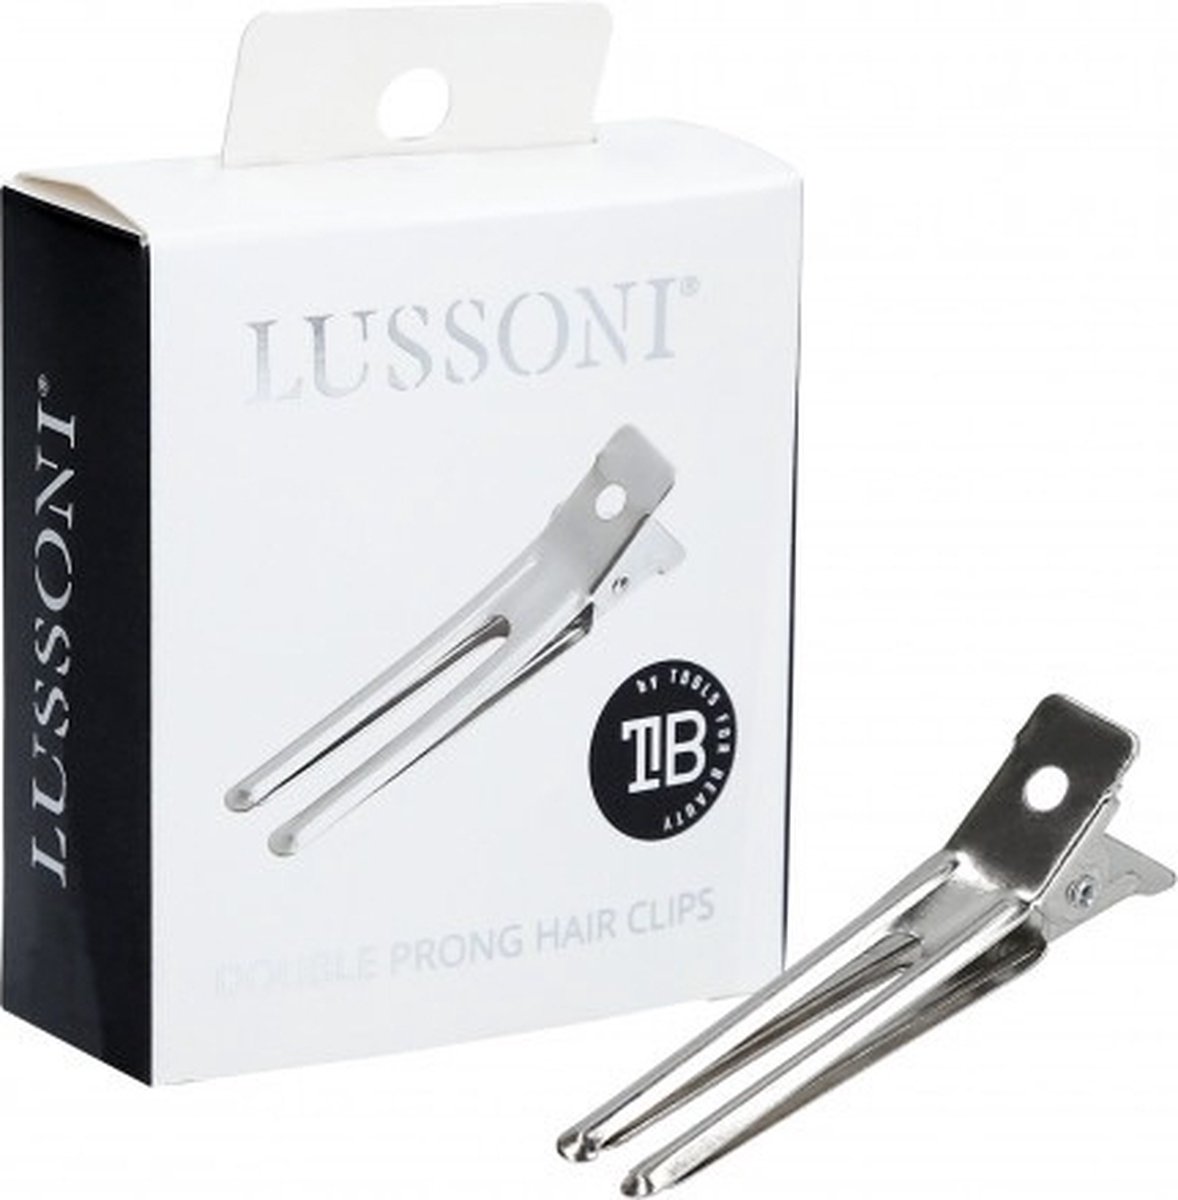 Lussoni - Double Prong Hair Clips - 36st